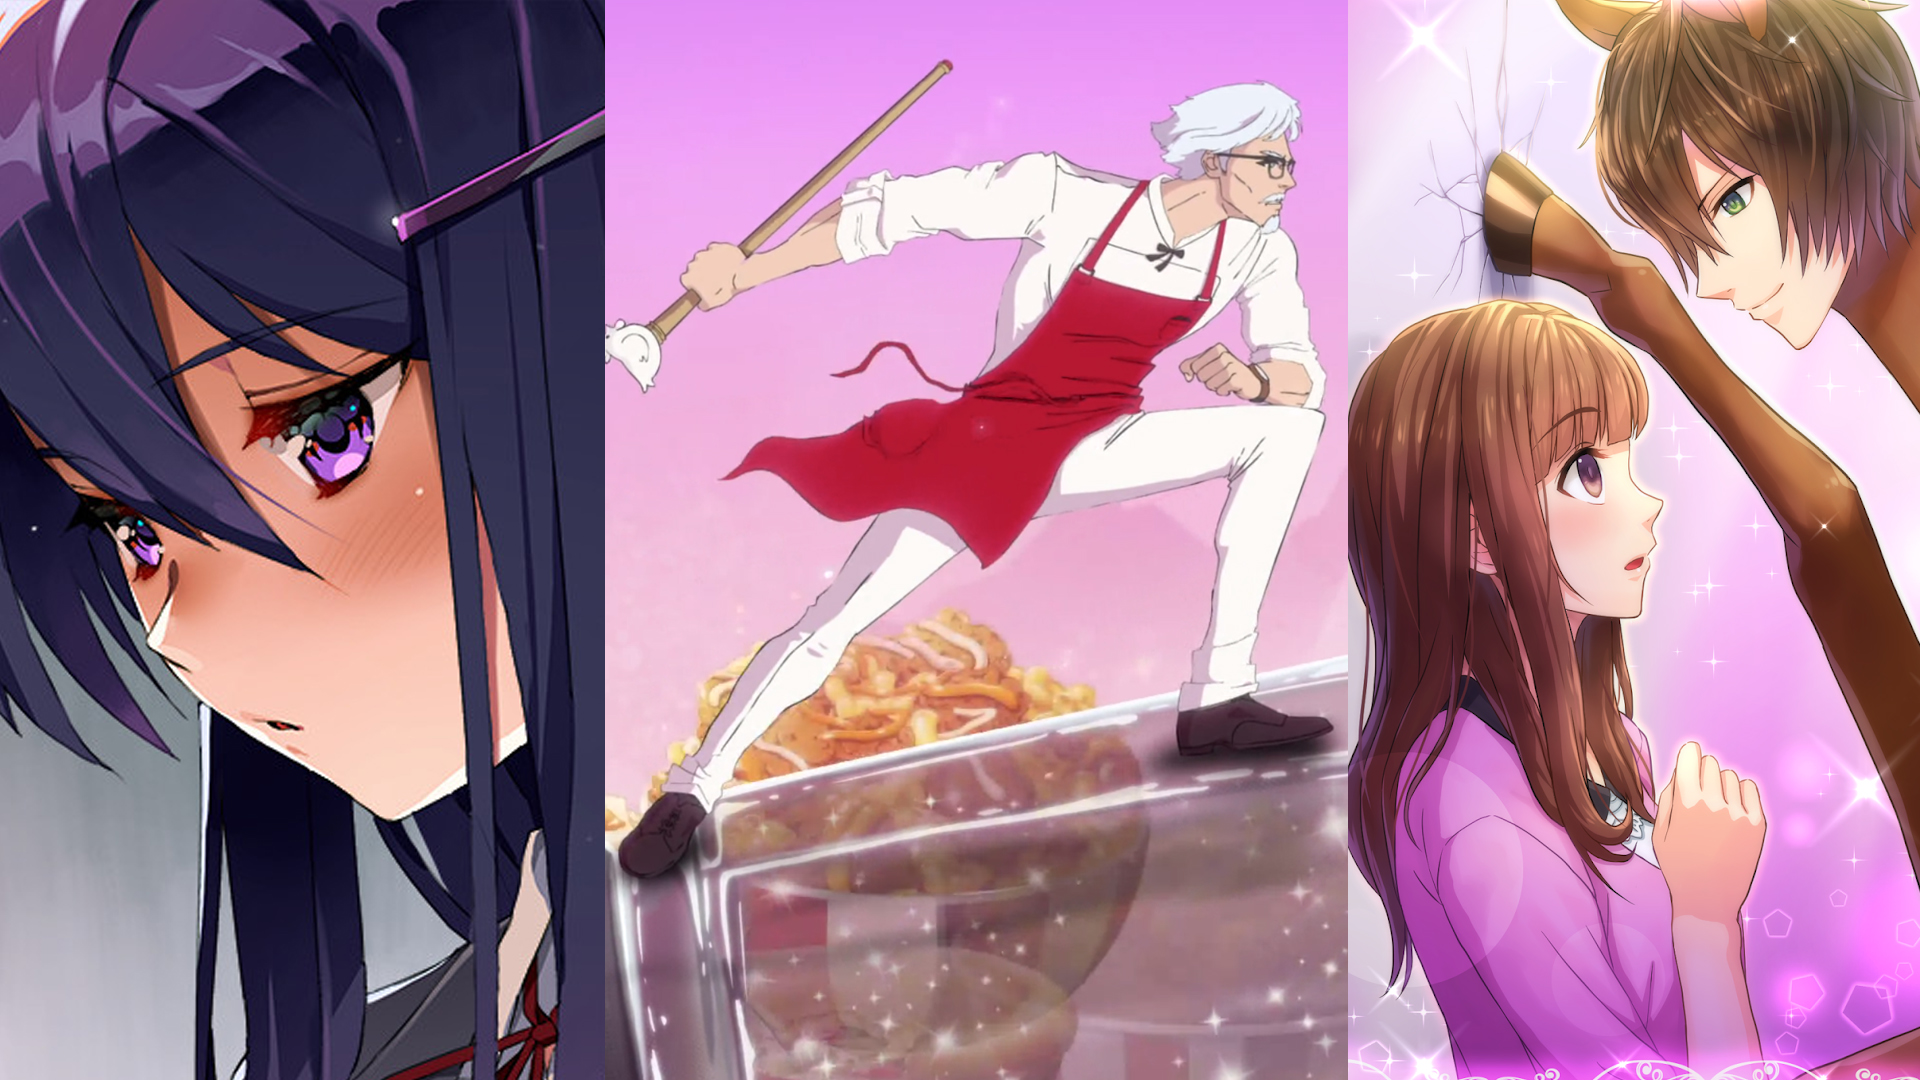 Dating Sim Games With Their Own Anime Adaptations